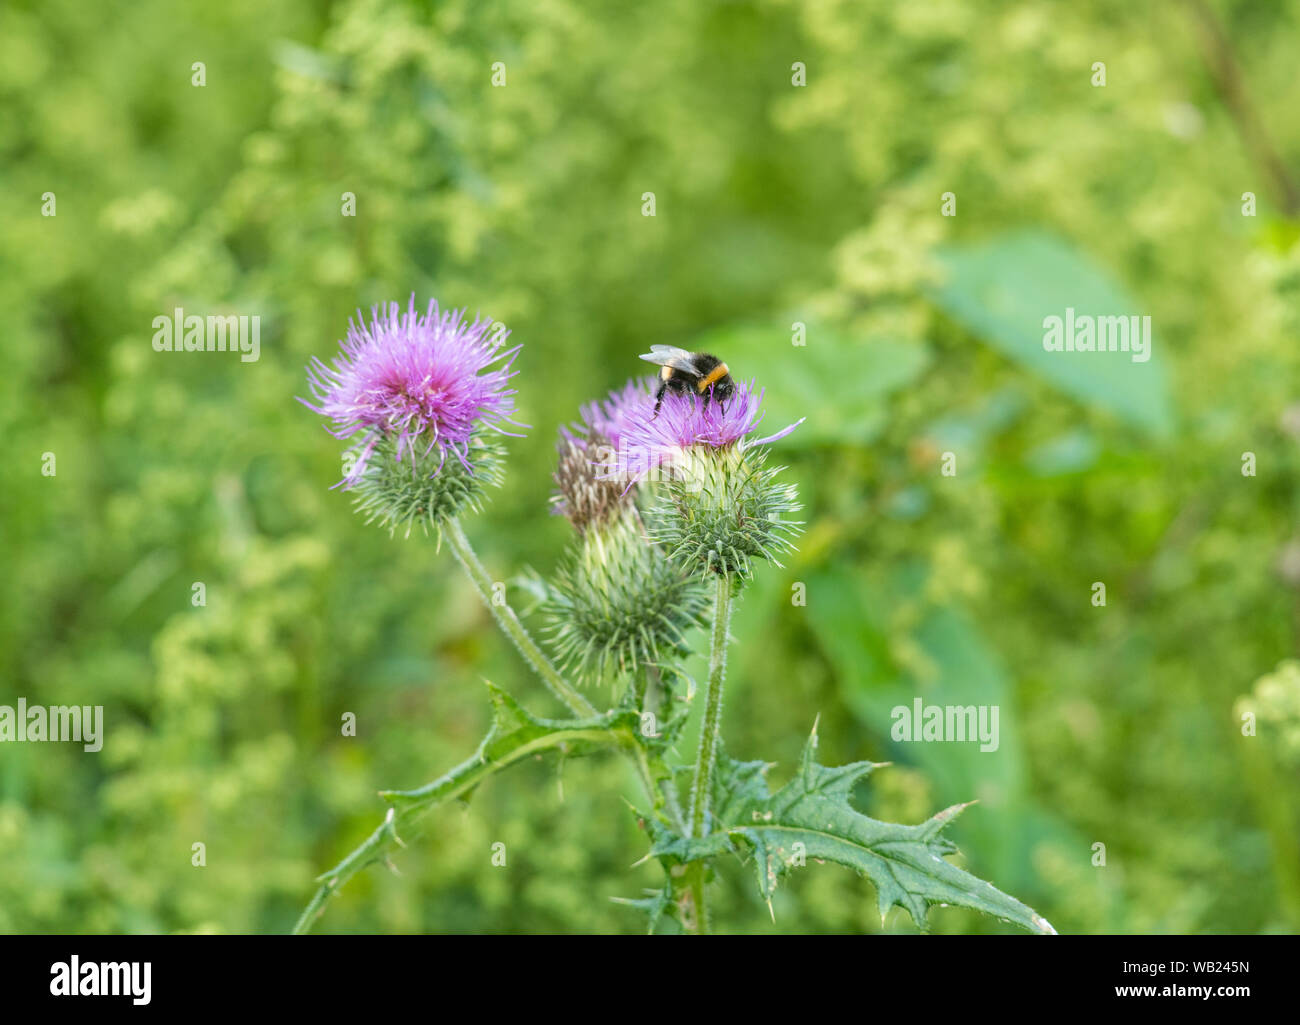 Honey bee foraging for pollen on the flower of a Spear Thistle / Cirsium vulgare. Metaphor honey production, bee population decline, bees in decline. Stock Photo